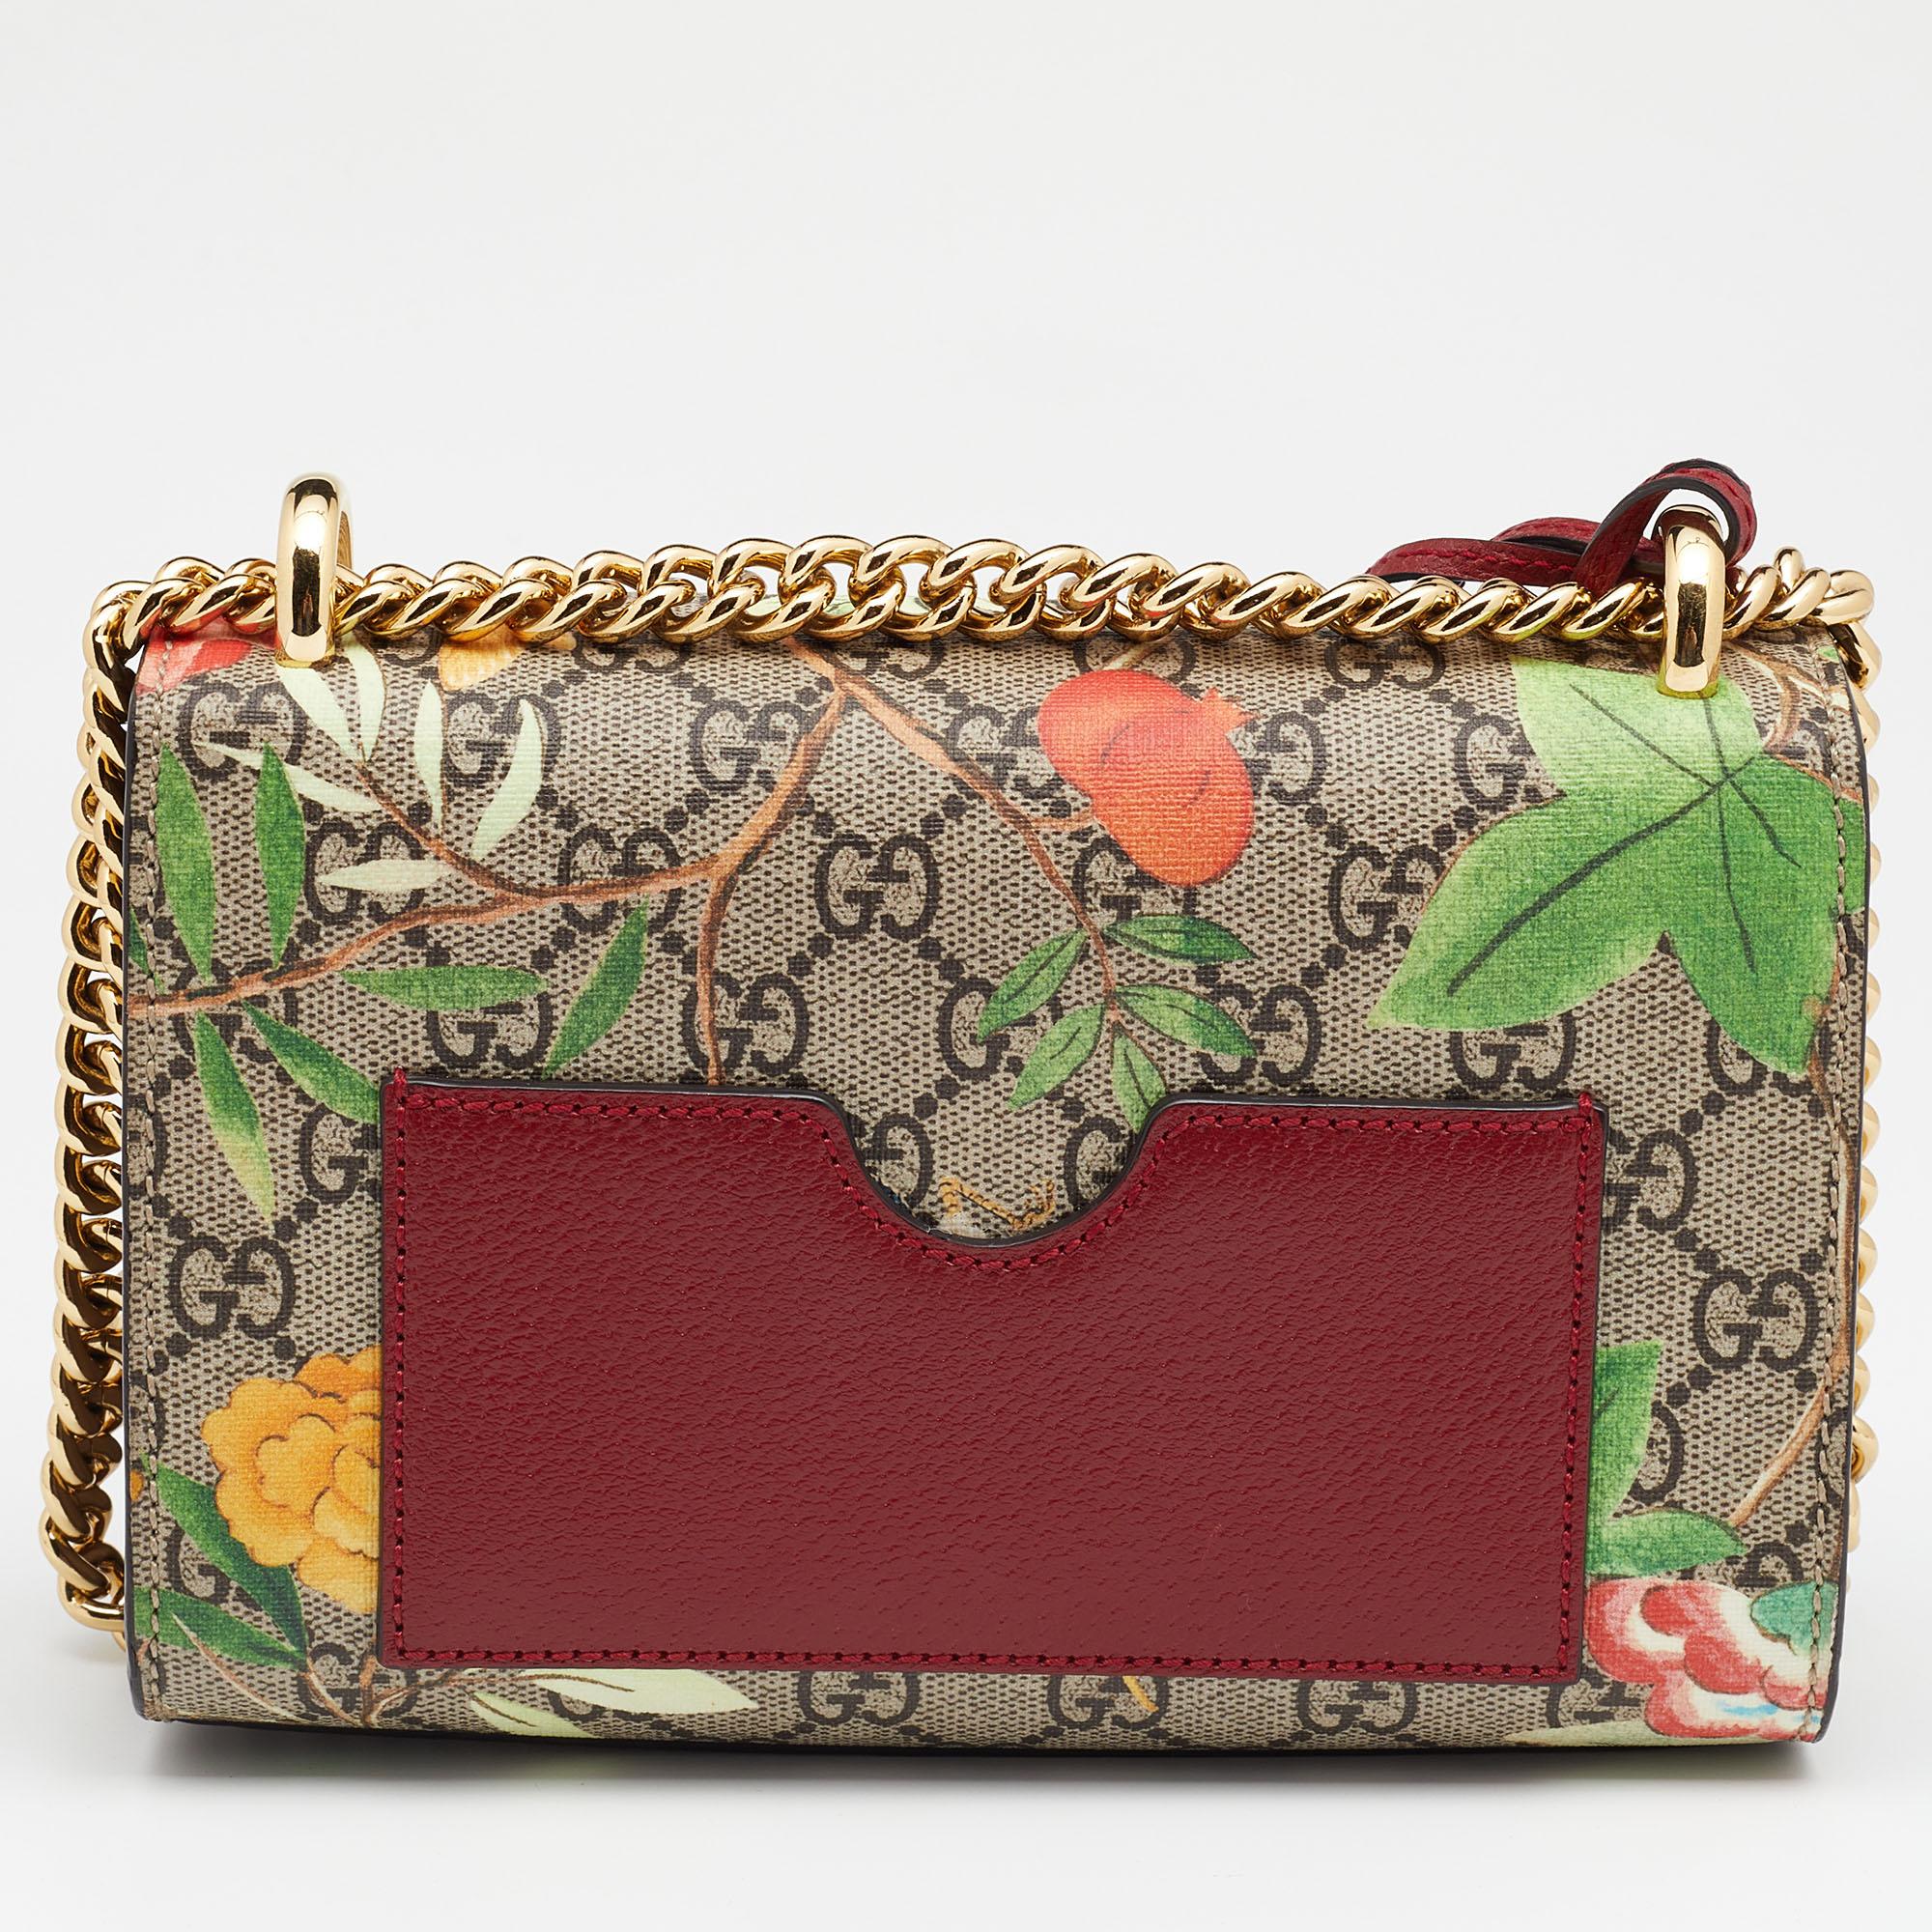 Embodying the vibrant spirit of the House, this Gucci shoulder bag is elevated with the Tian print on the GG Supreme canvas and leather exterior. It has a metal lock on the flap to secure the Alcantara-lined interior and a chain is provided for